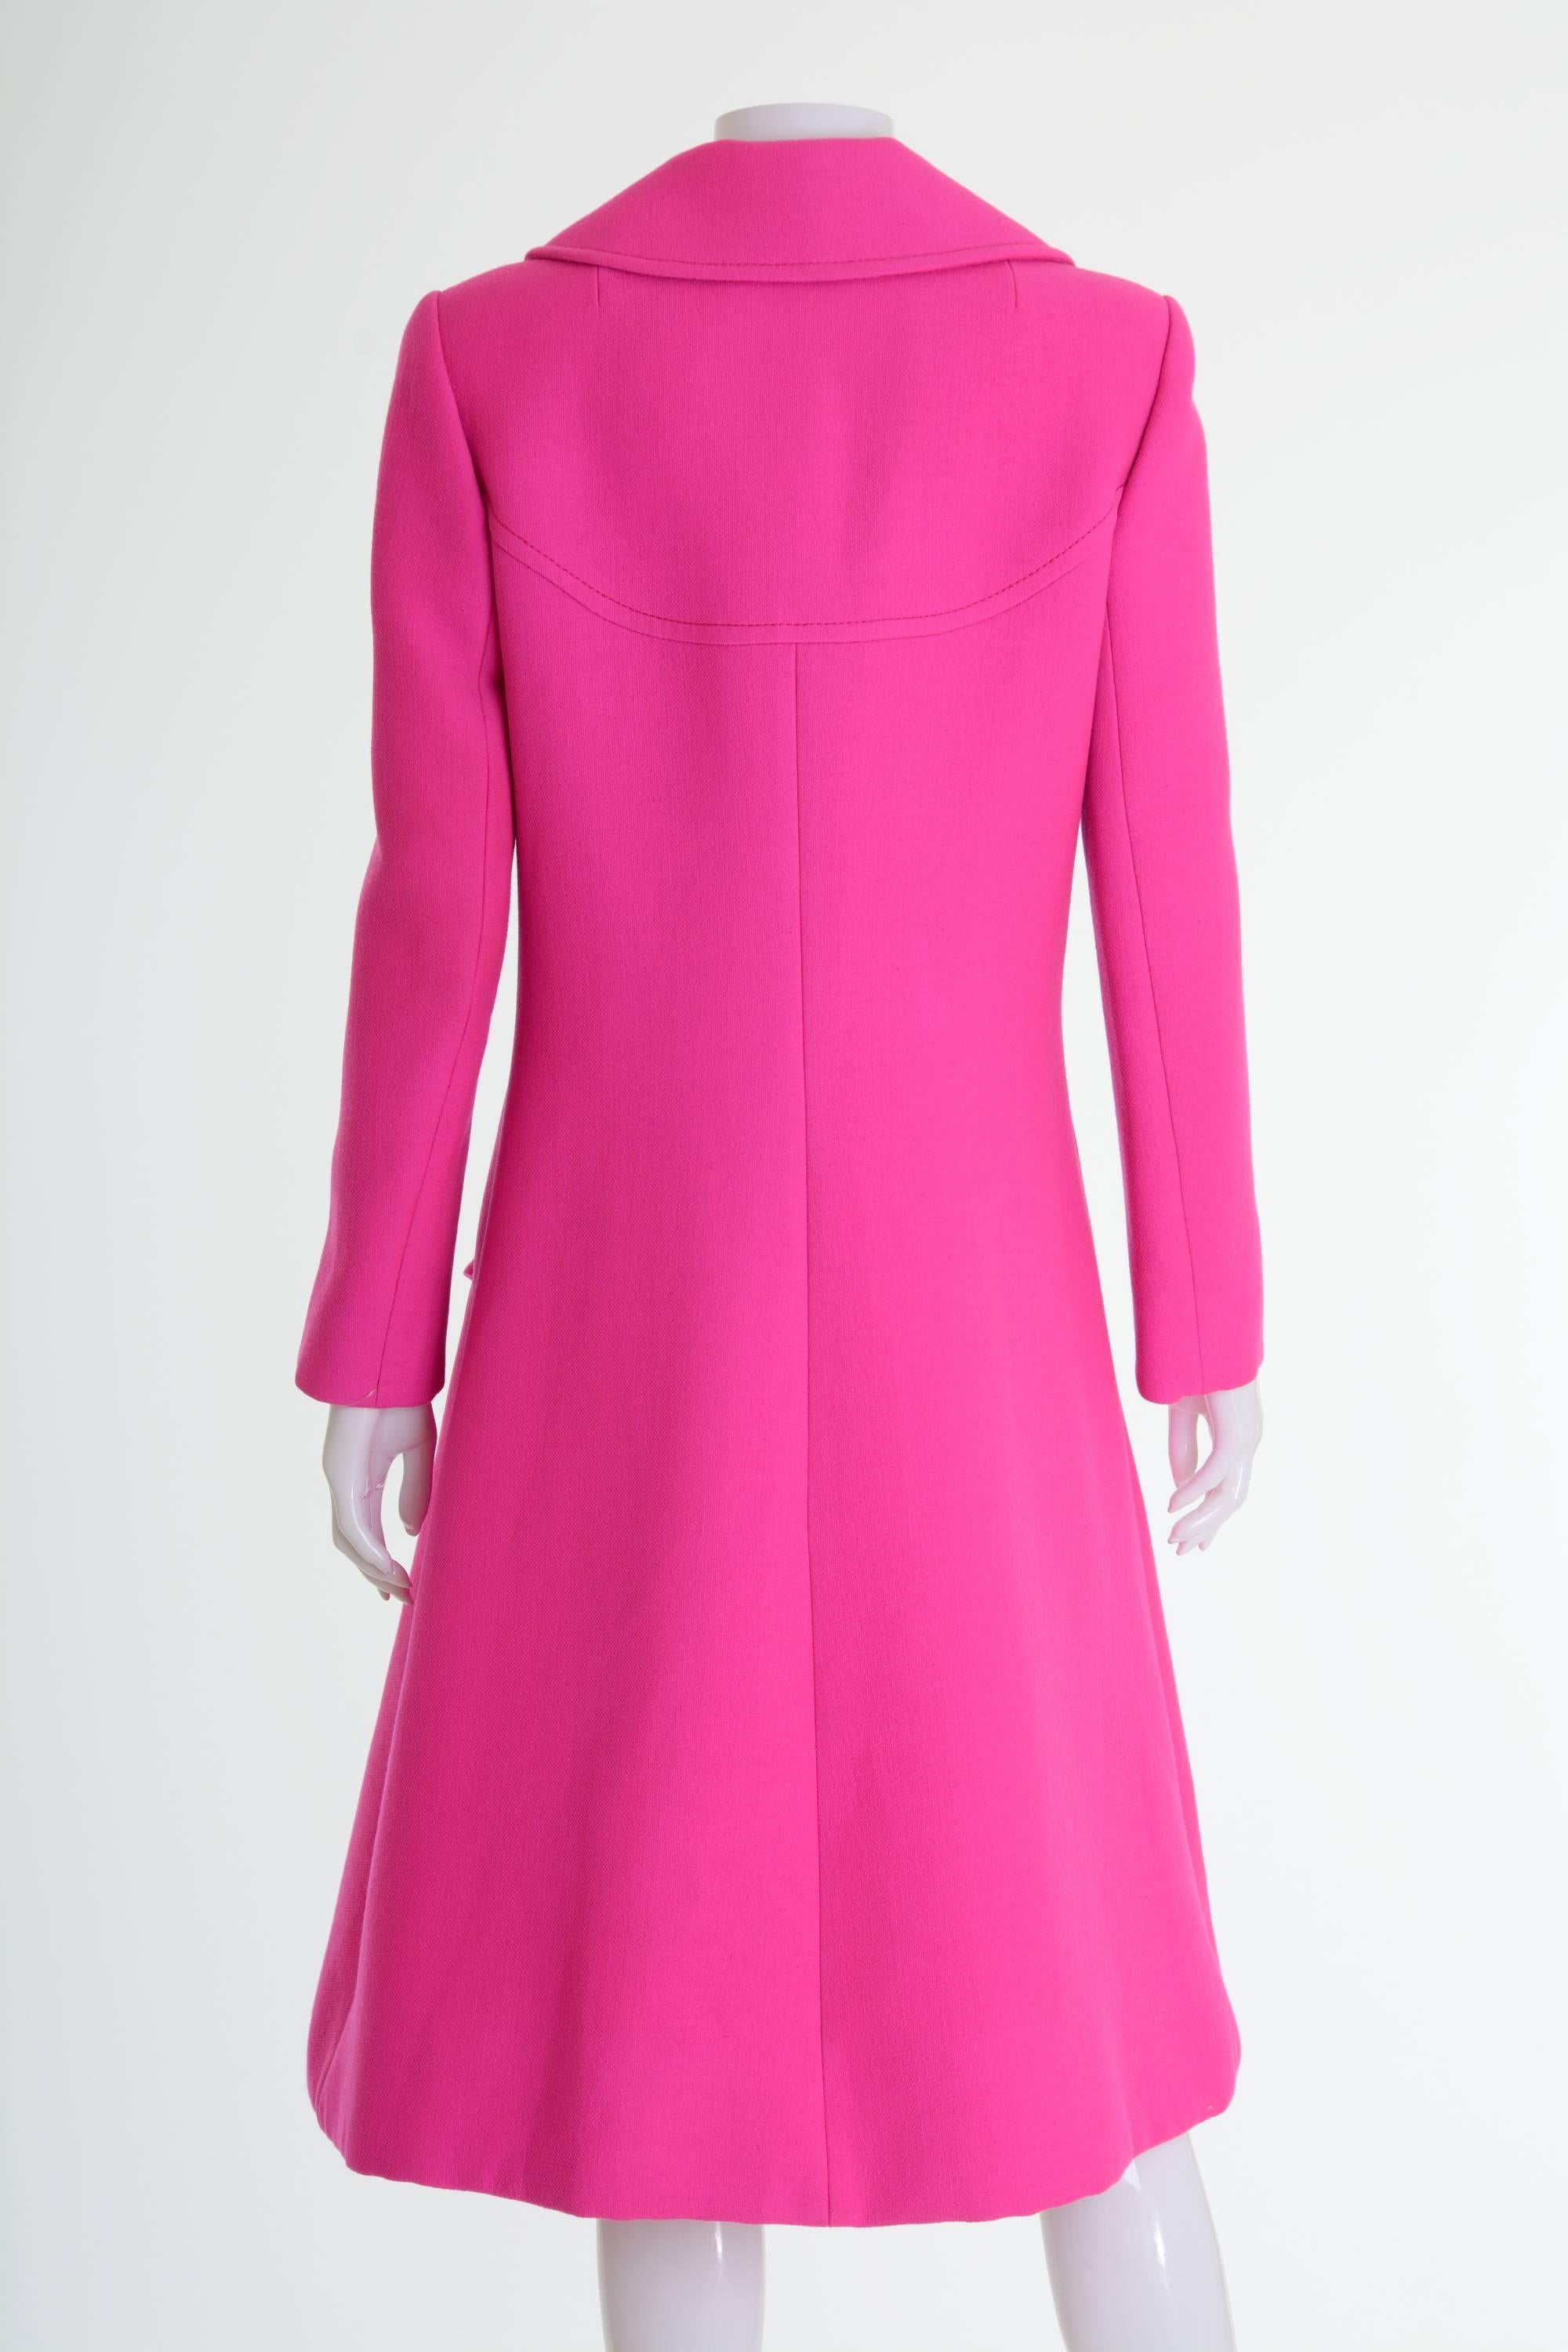 This gorgeous Miss Dior early 1970s overcoat is in a shocking pink woolen fabric. It has A-line, plastic buttons closure, long sleeves and round collar. It's fully lined and has two frontal flap pockets.

Very good vintage condition

Label: Miss